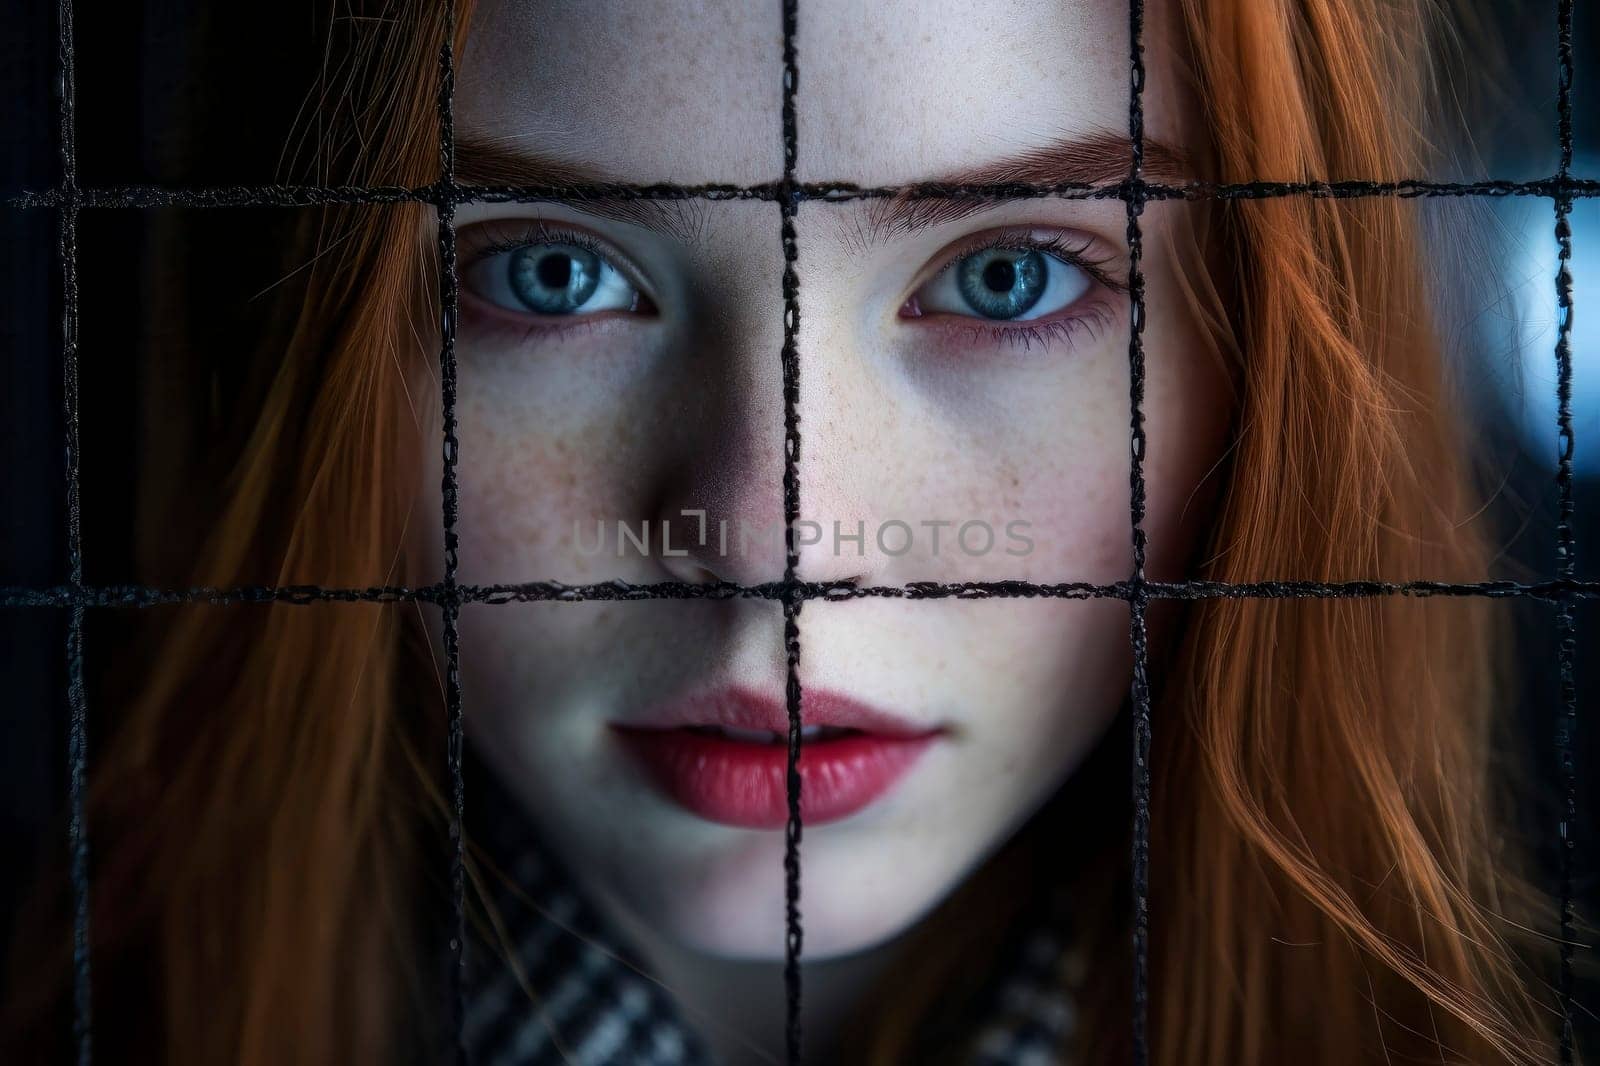 A captivating photograph of a girl staring intensely into the camera from behind a mesh, reflecting her longing for freedom